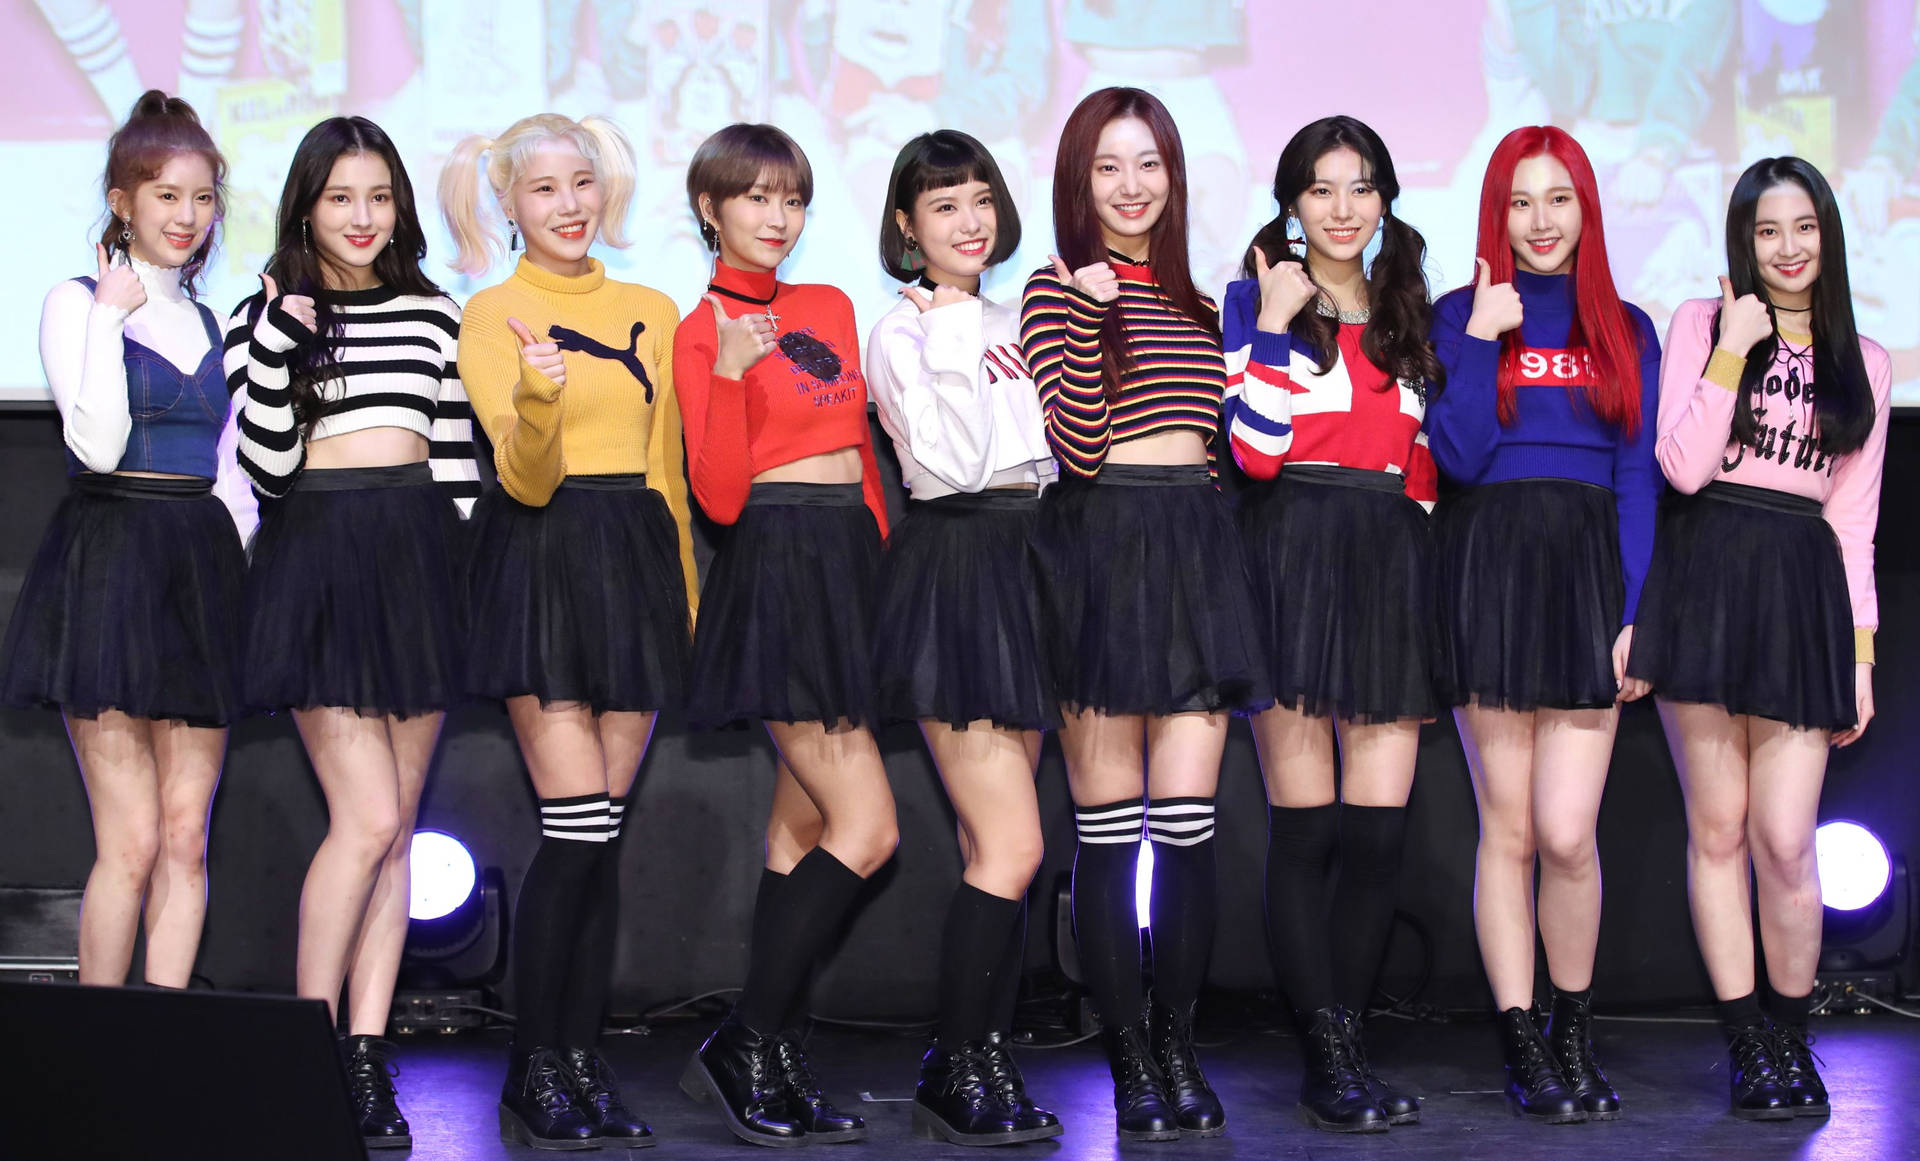 Free Momoland Wallpaper Downloads, [100+] Momoland Wallpapers for FREE |  